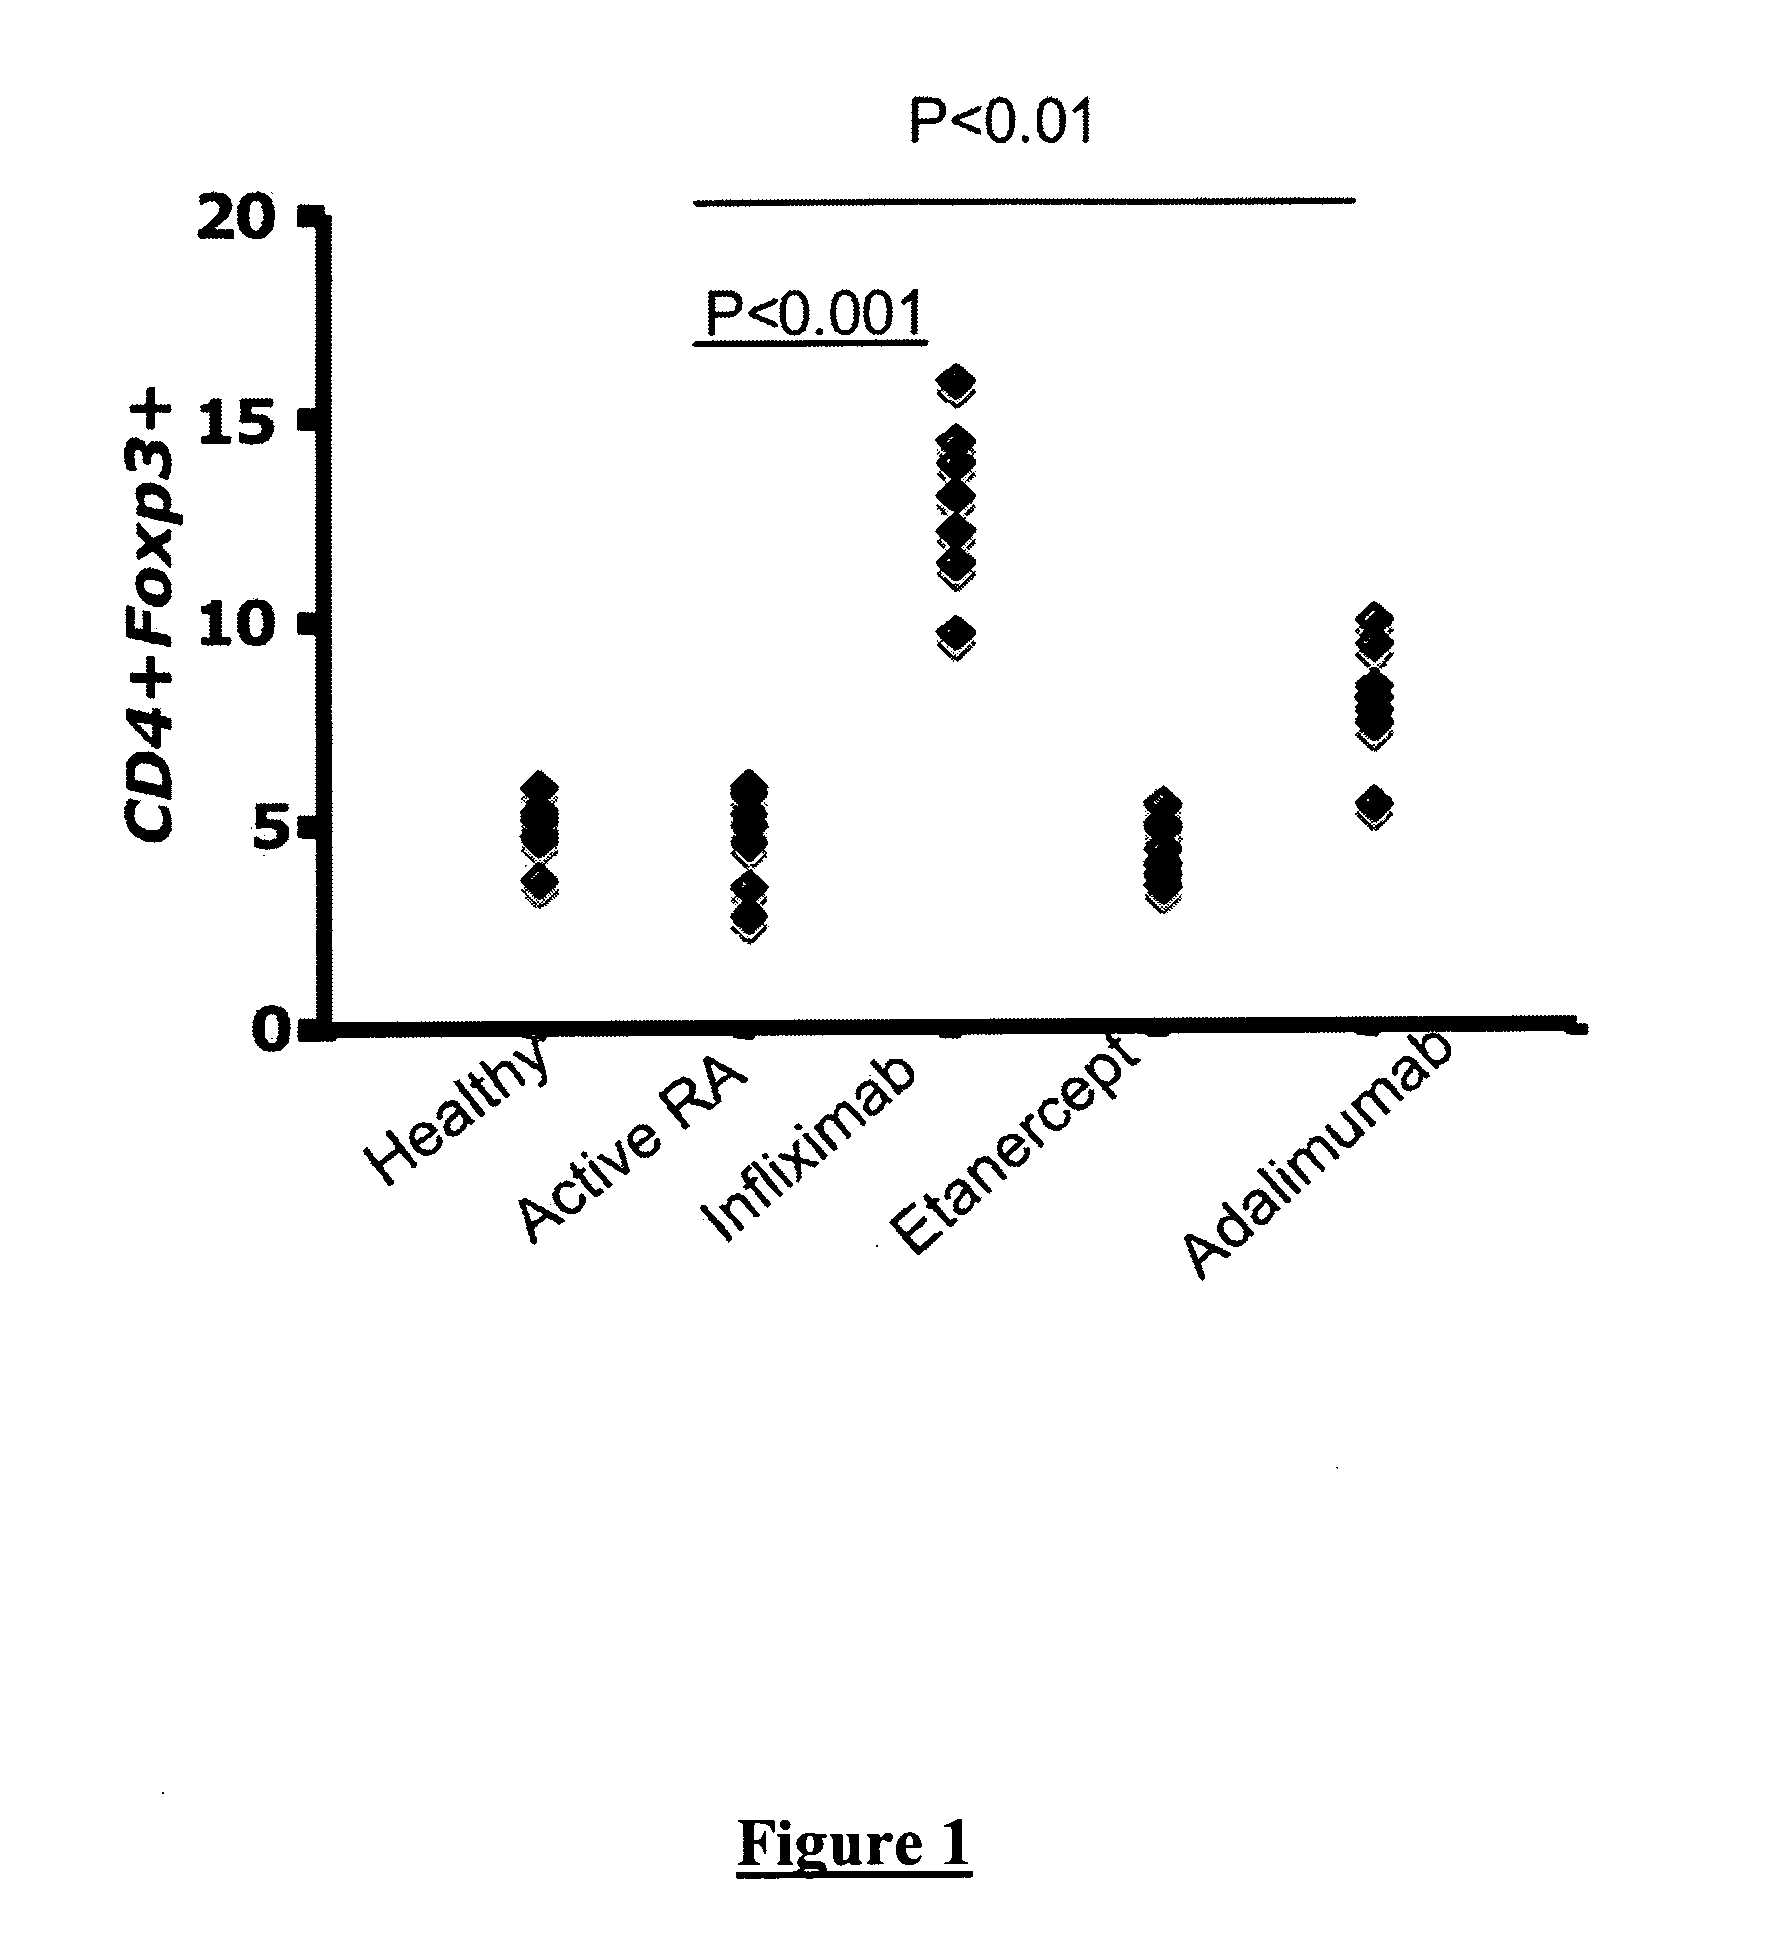 Method for Predicting the Response of a Patient to Treatment with an Anti-TNF Alpha Antibody